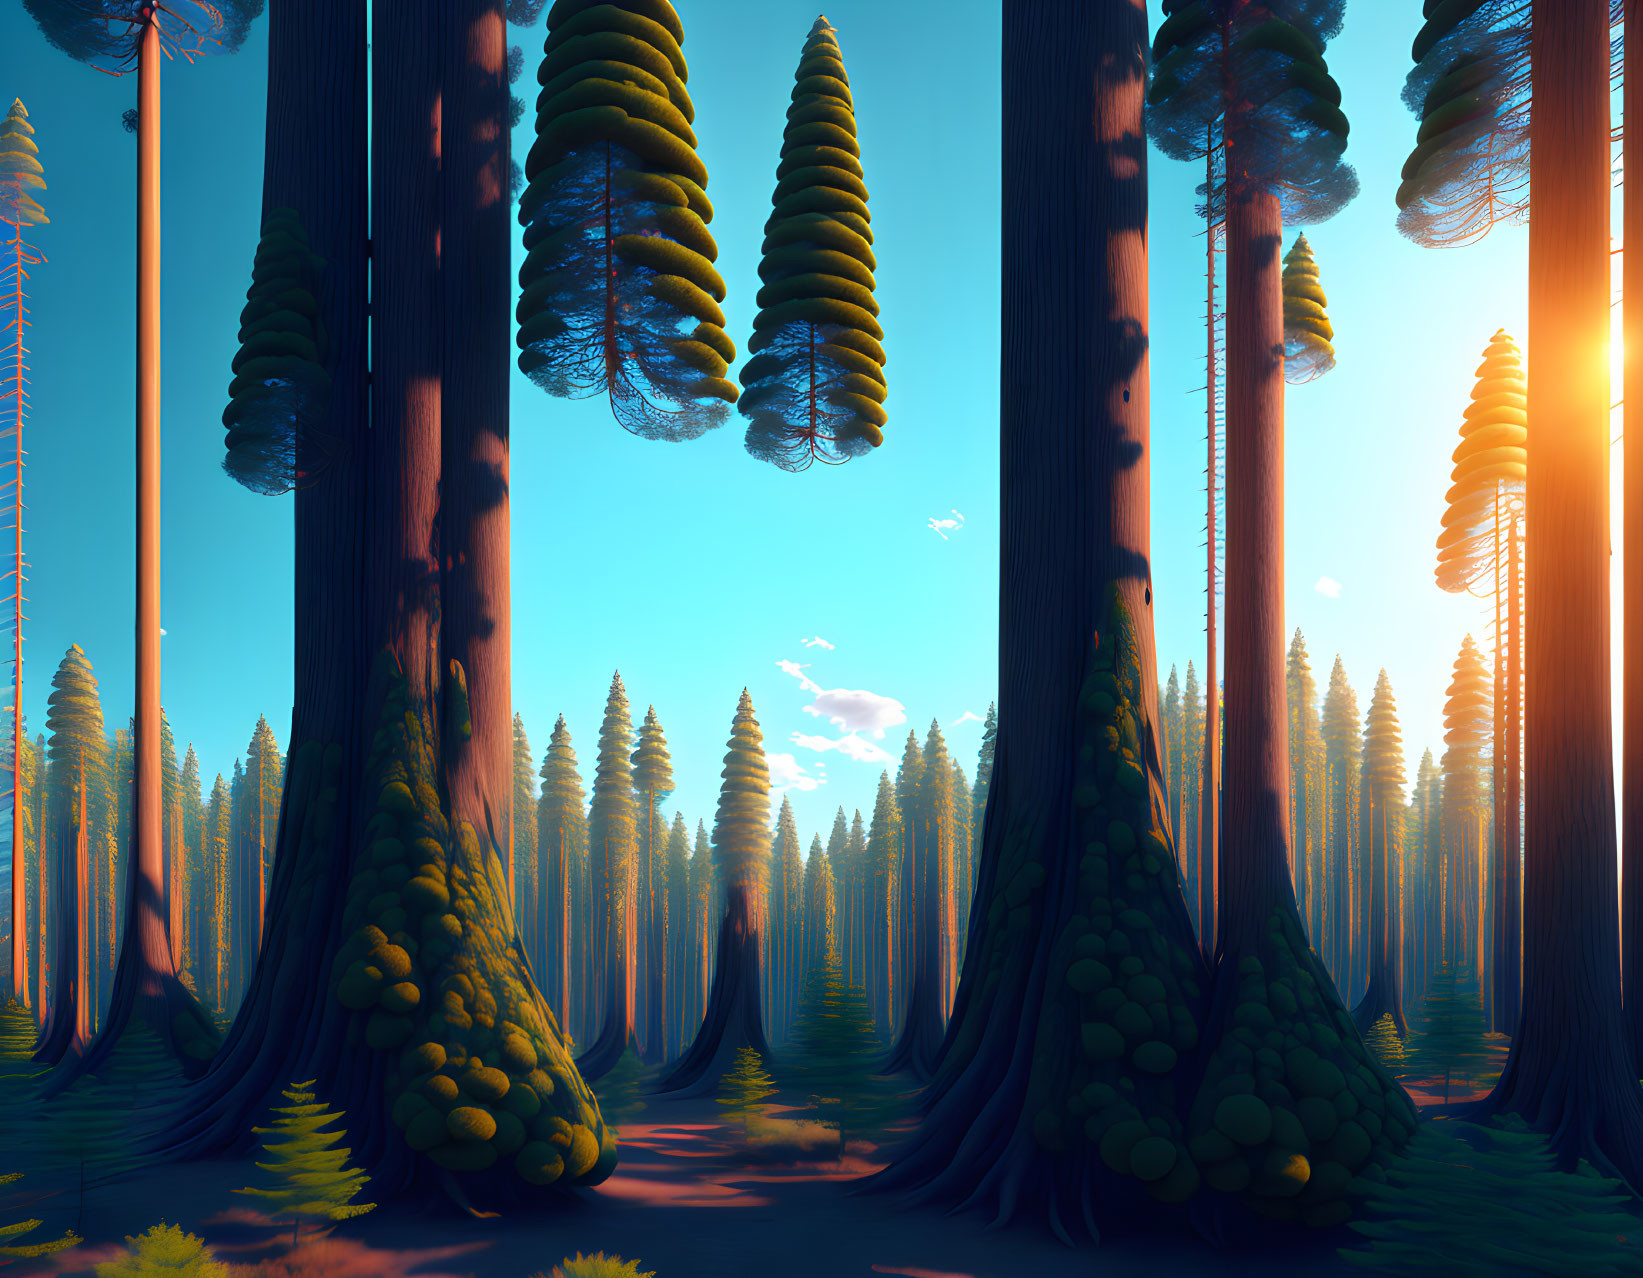 Surreal forest with towering trees and oversized pine cones